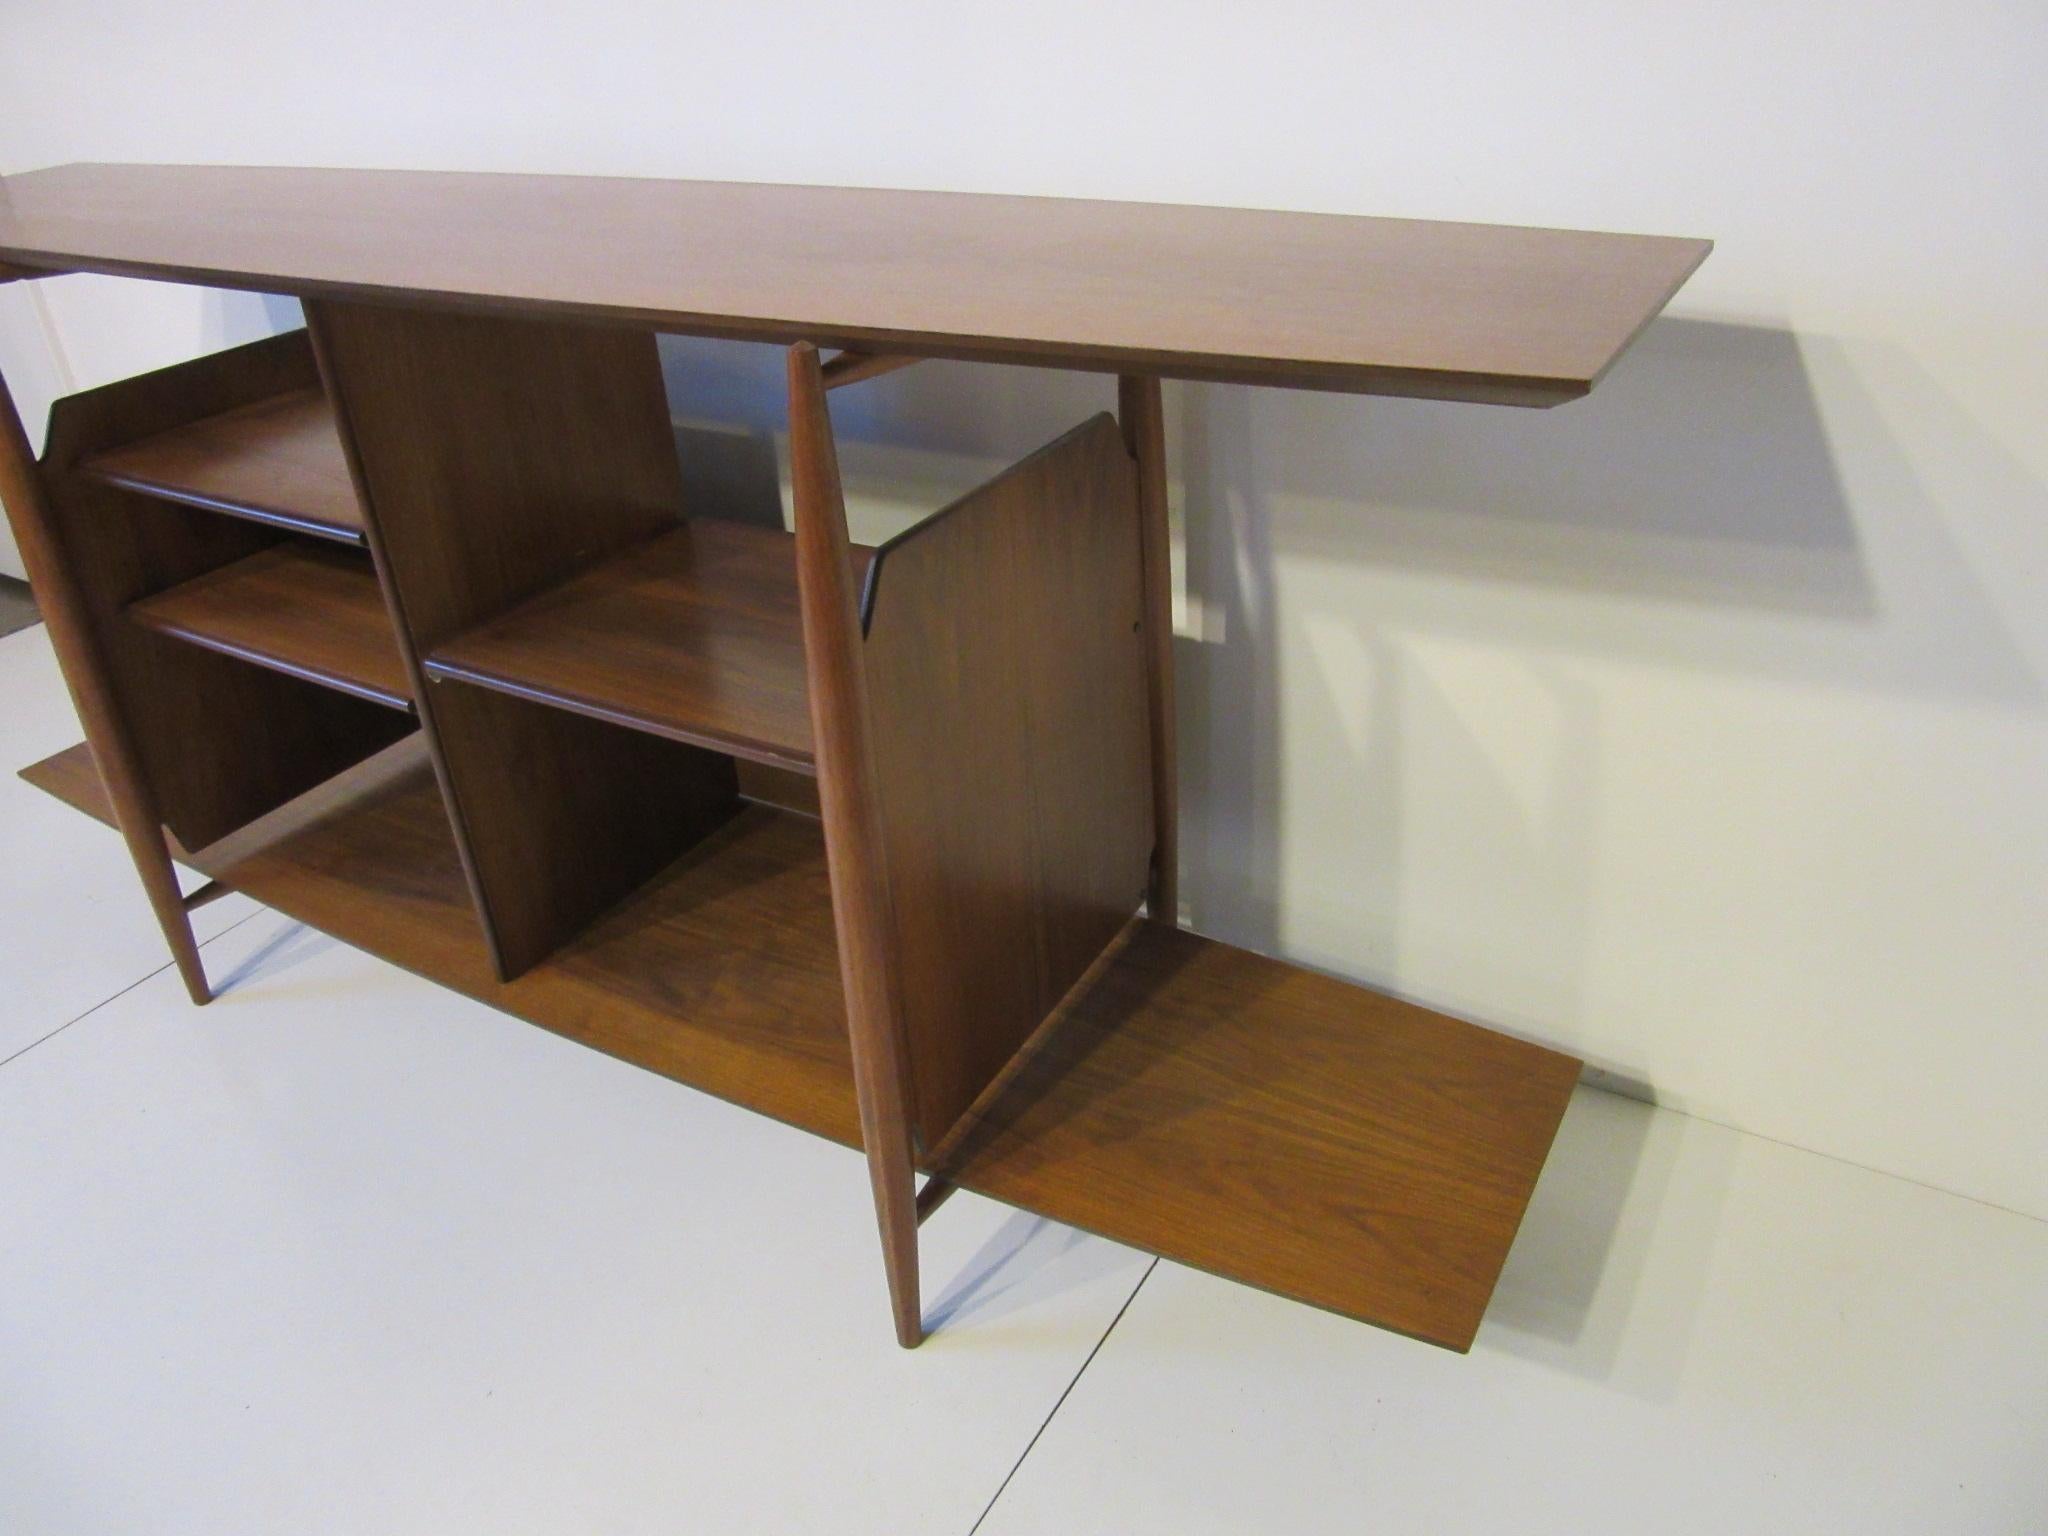 A medium toned walnut Stereo / Media shelving unit with two adjustable shelves and one pull out shelve for a turntable or other media device. Amp and tuner placement on the adjustable shelves with open back for wires. Additional storage to each side